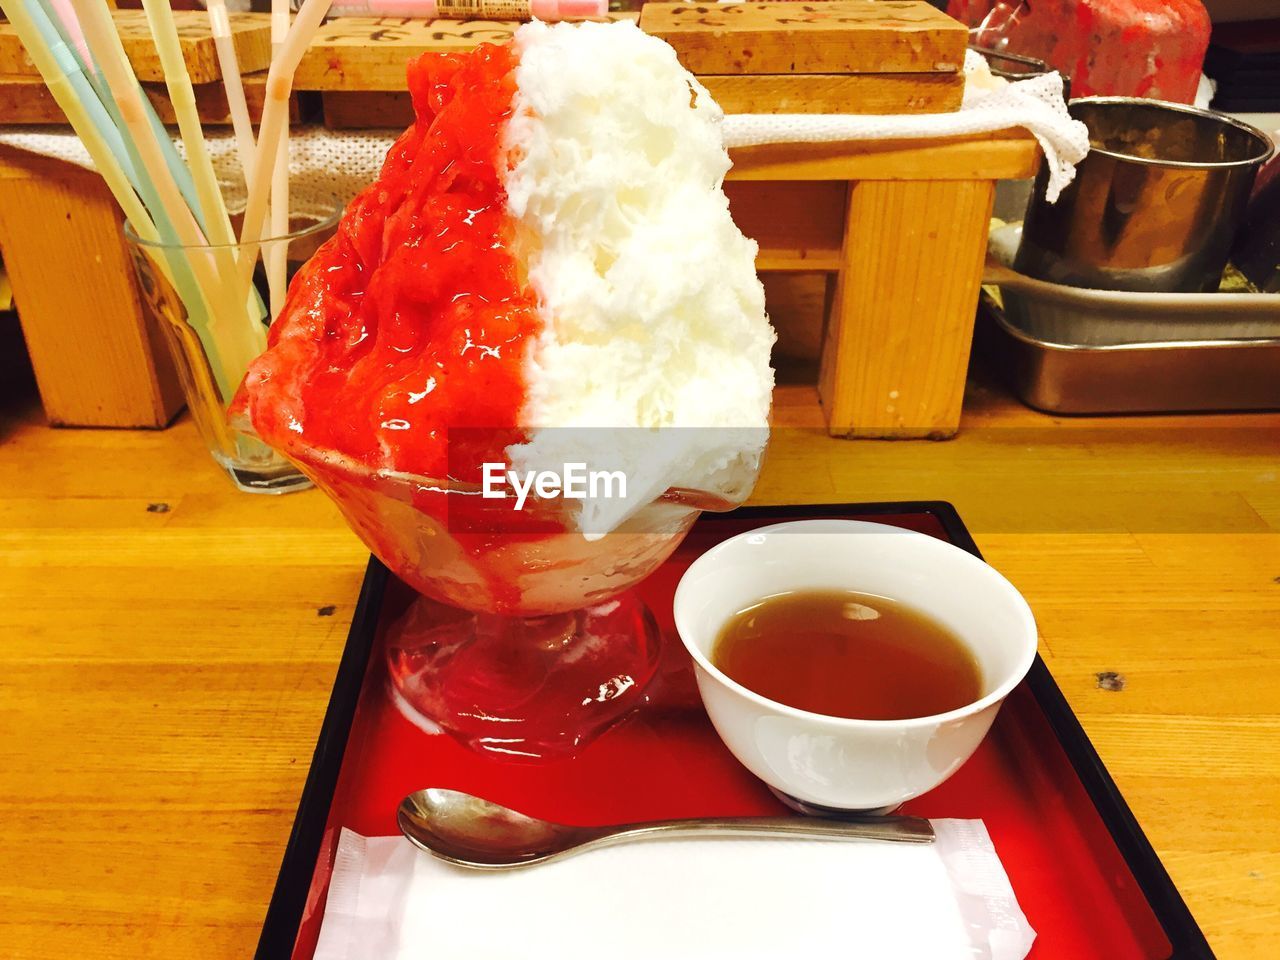 CLOSE-UP OF ICE CREAM WITH JUICE ON TABLE